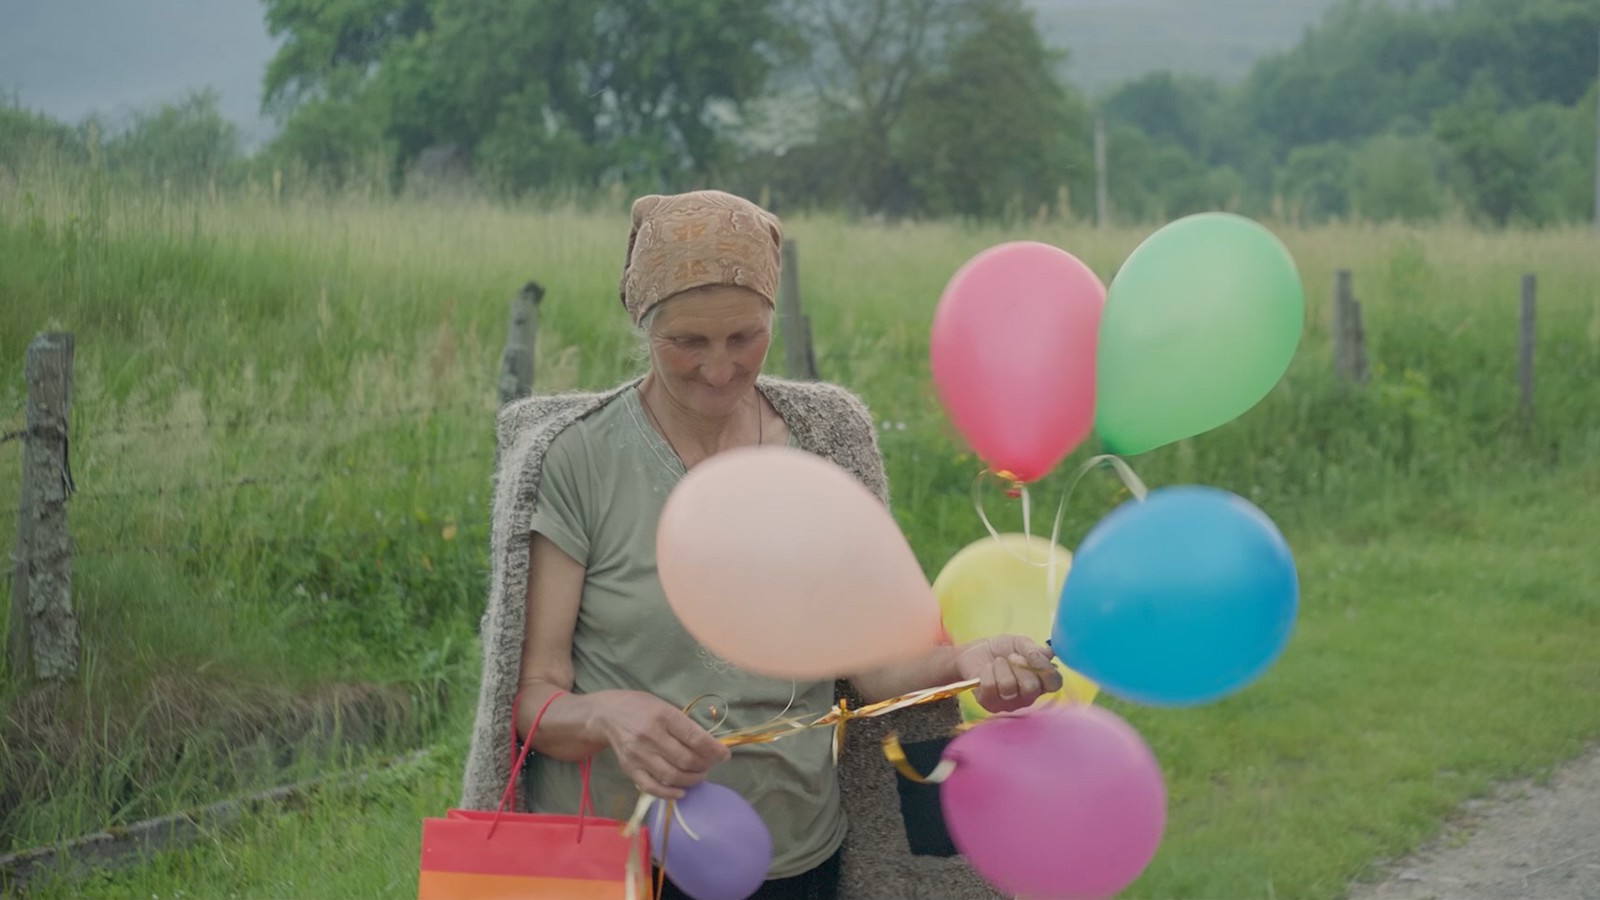 An elderly woman in a rural, green area stands by the roadside holding a cluster of colorful balloons